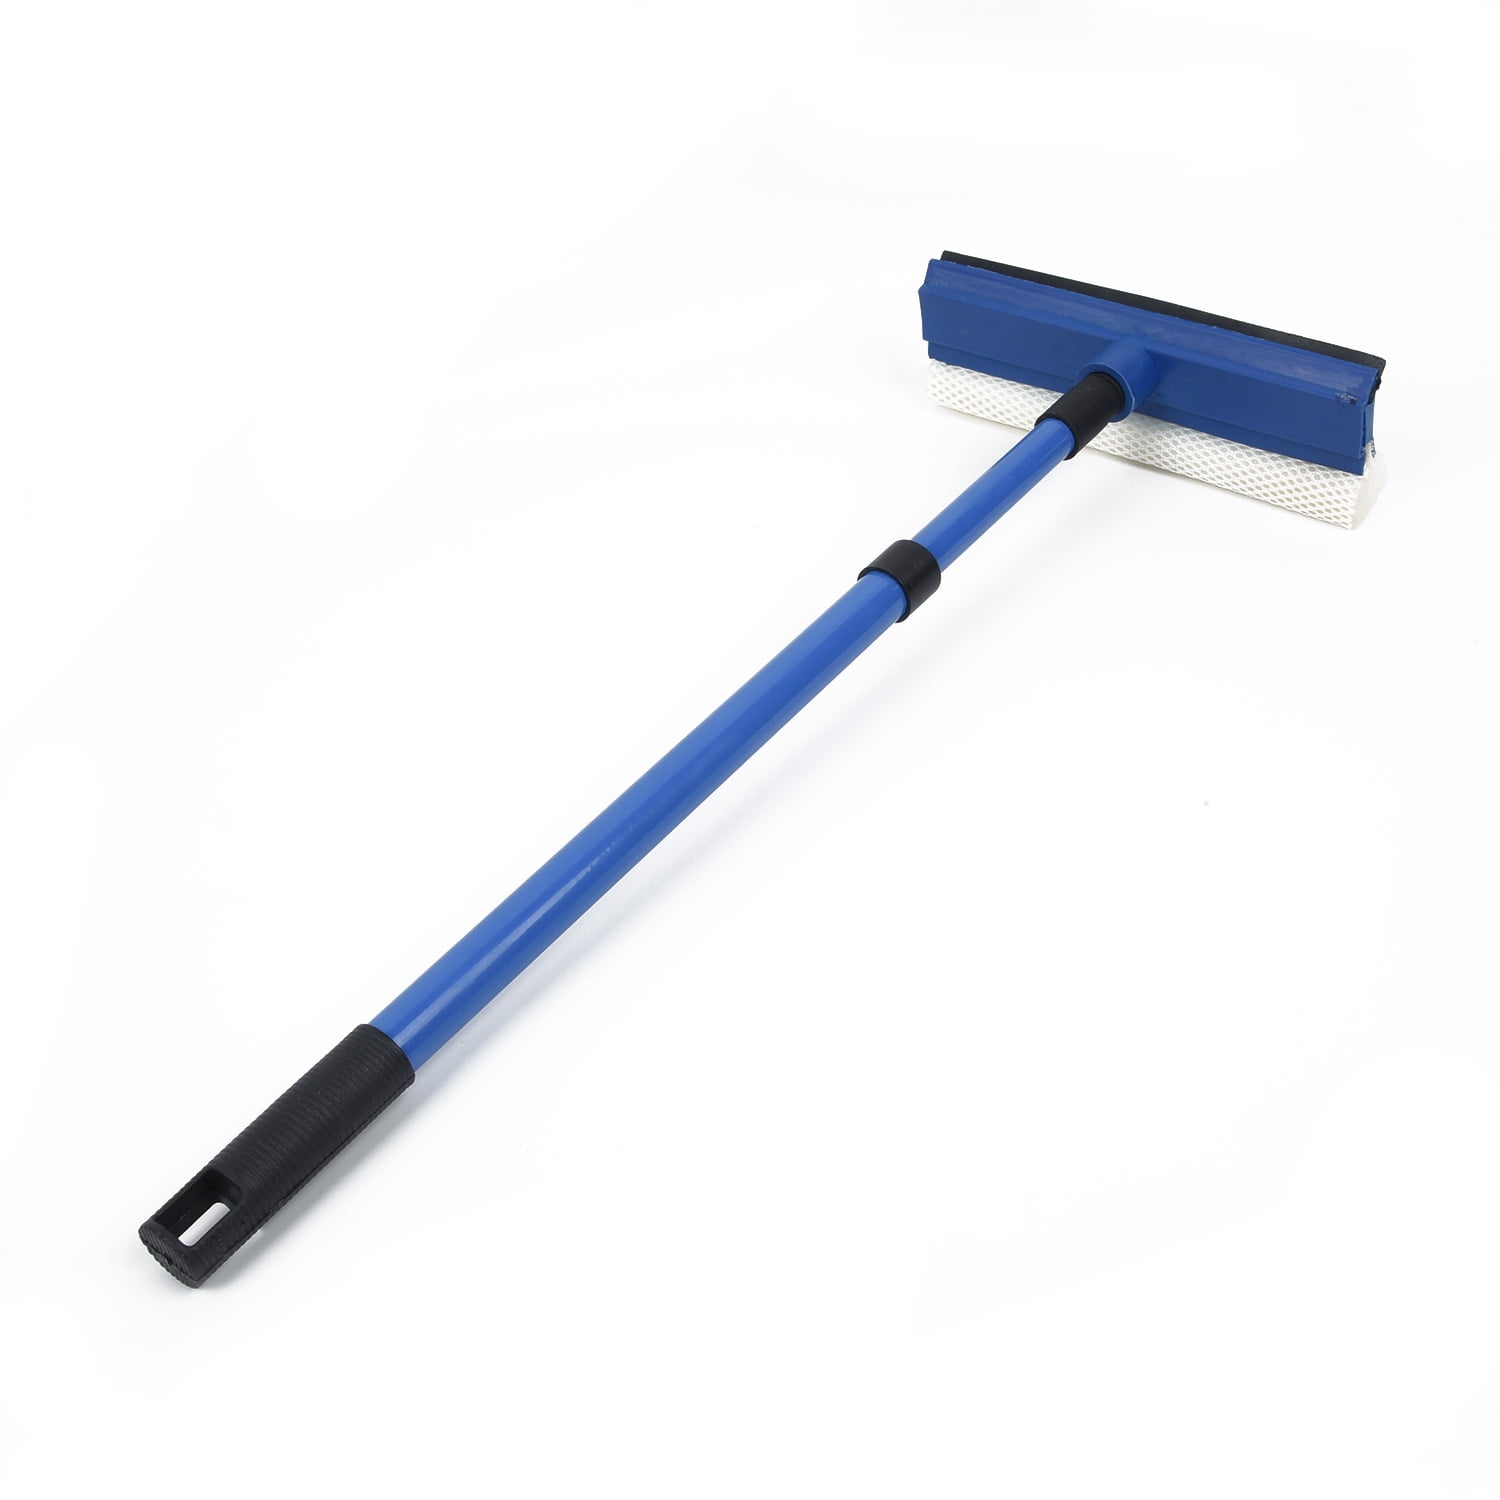  Squeegee for Window Cleaning with Long Handle, 2-in-1 Window  Squeege for Home, Car Windshield, Mirror, Glass Cleaning with Extension  Pole 18-30 : Health & Household